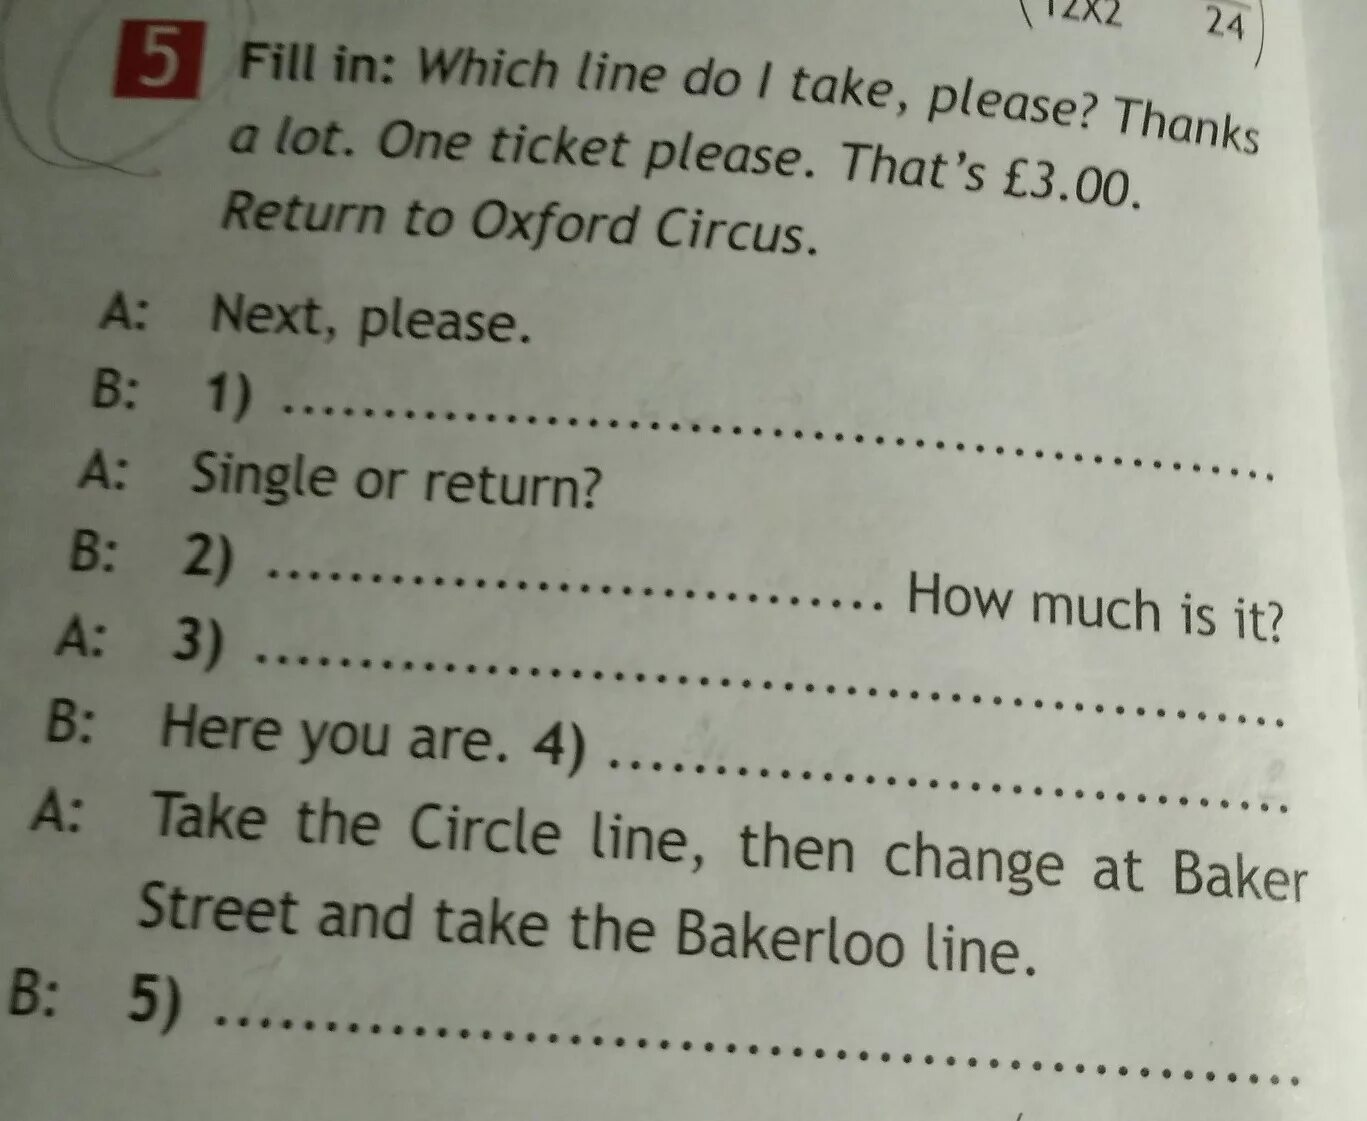 Fill in natural senior. Complete the Dialogue use which line do i take please. Complete the Dialogue use which line do take please thanks a lot one ticket please that's£ 3 00 Return to Oxford Circus. Thanks a lot. Nest please two tickets please как читается.